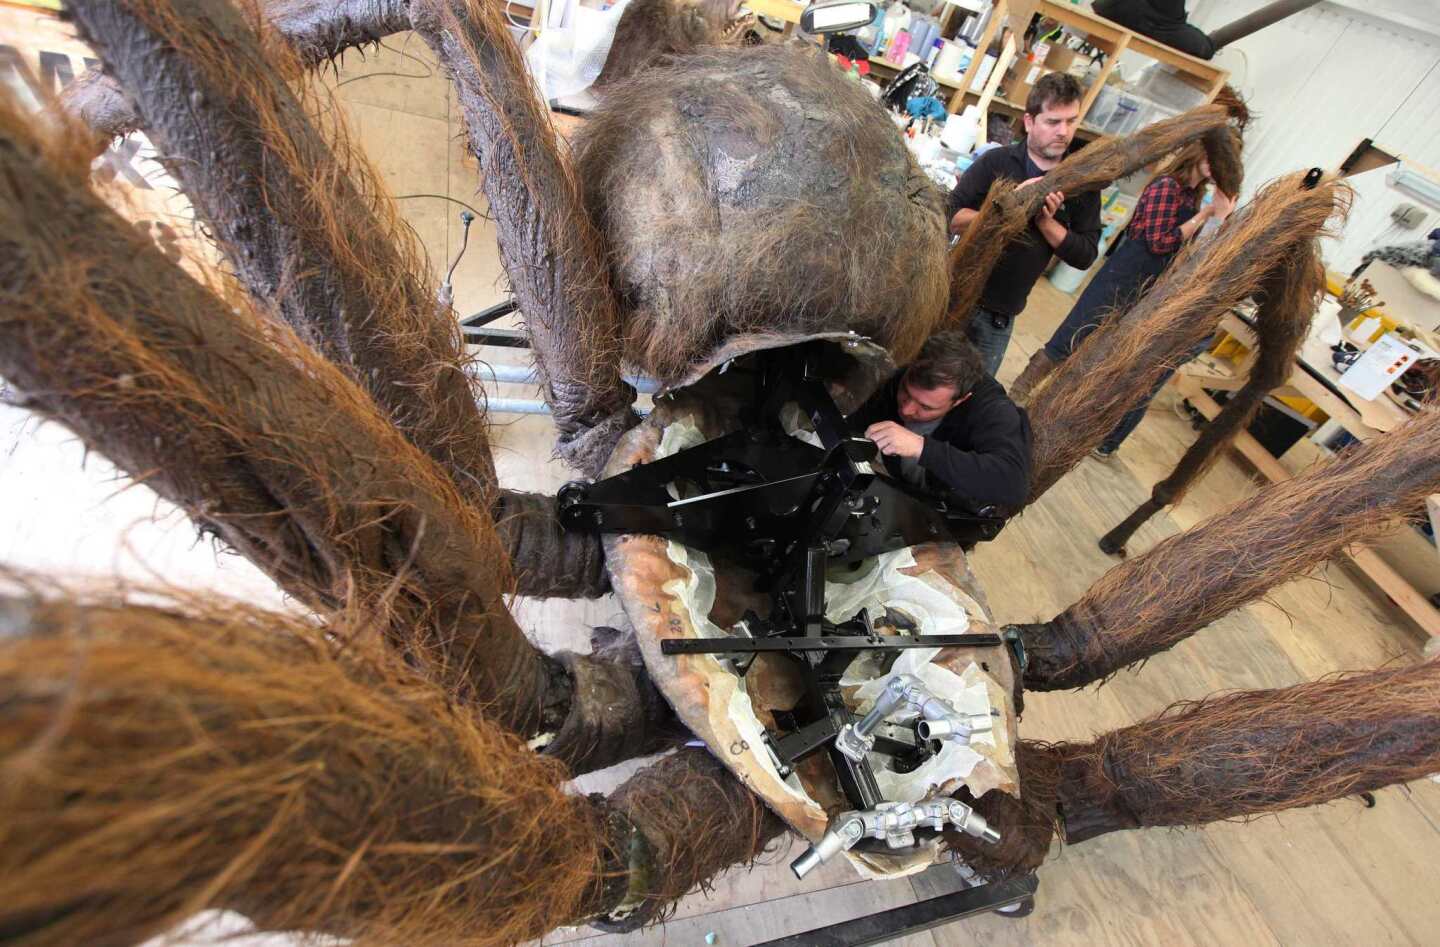 A member of the Creatures Effects Team (yes, there was a whole team just for creature effects) is seen working on Aragog.